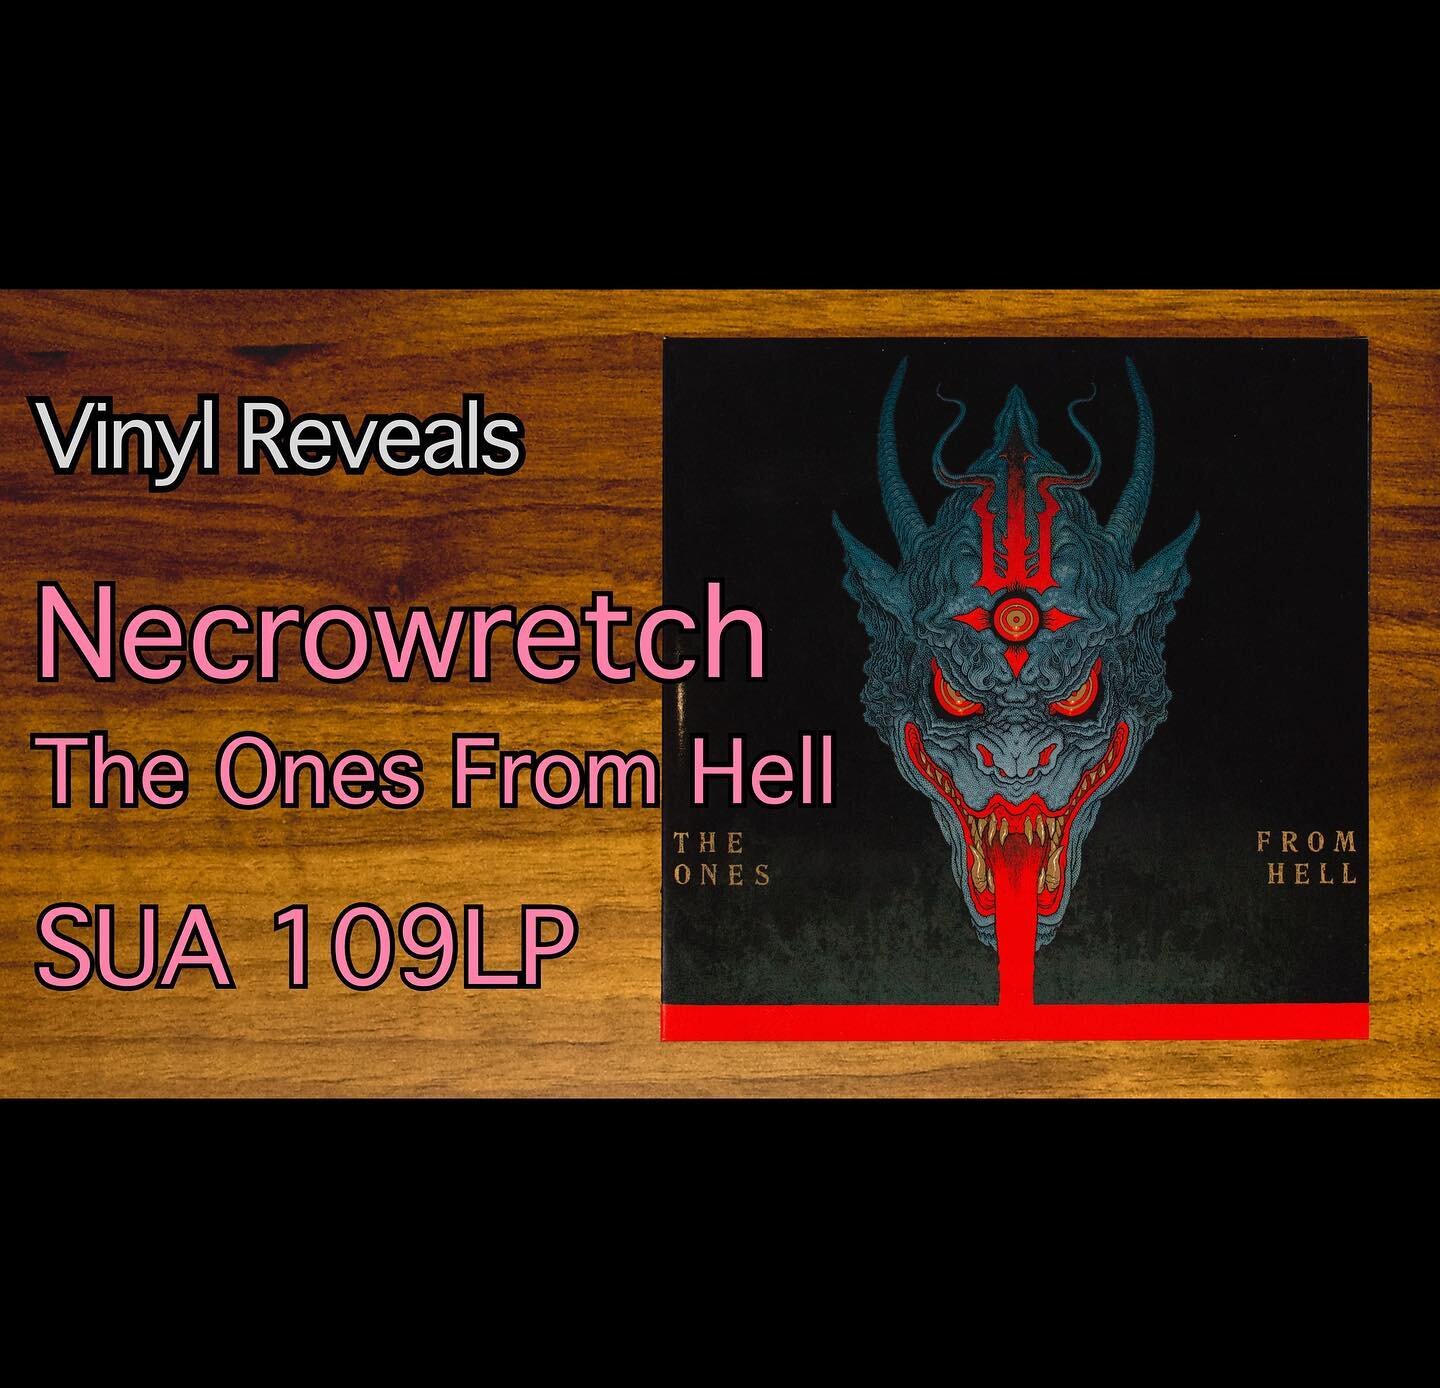 Today we are looking at The Ones From Hell by Necrowretch. Video is now live on the Vinyl Reveals YouTube channel. Link in profile.

#vinylReveal #vinyl #vinylcollection #vinylrecords #records #vinylReveals #vinylcommunity @necrowretch #necrowretch #